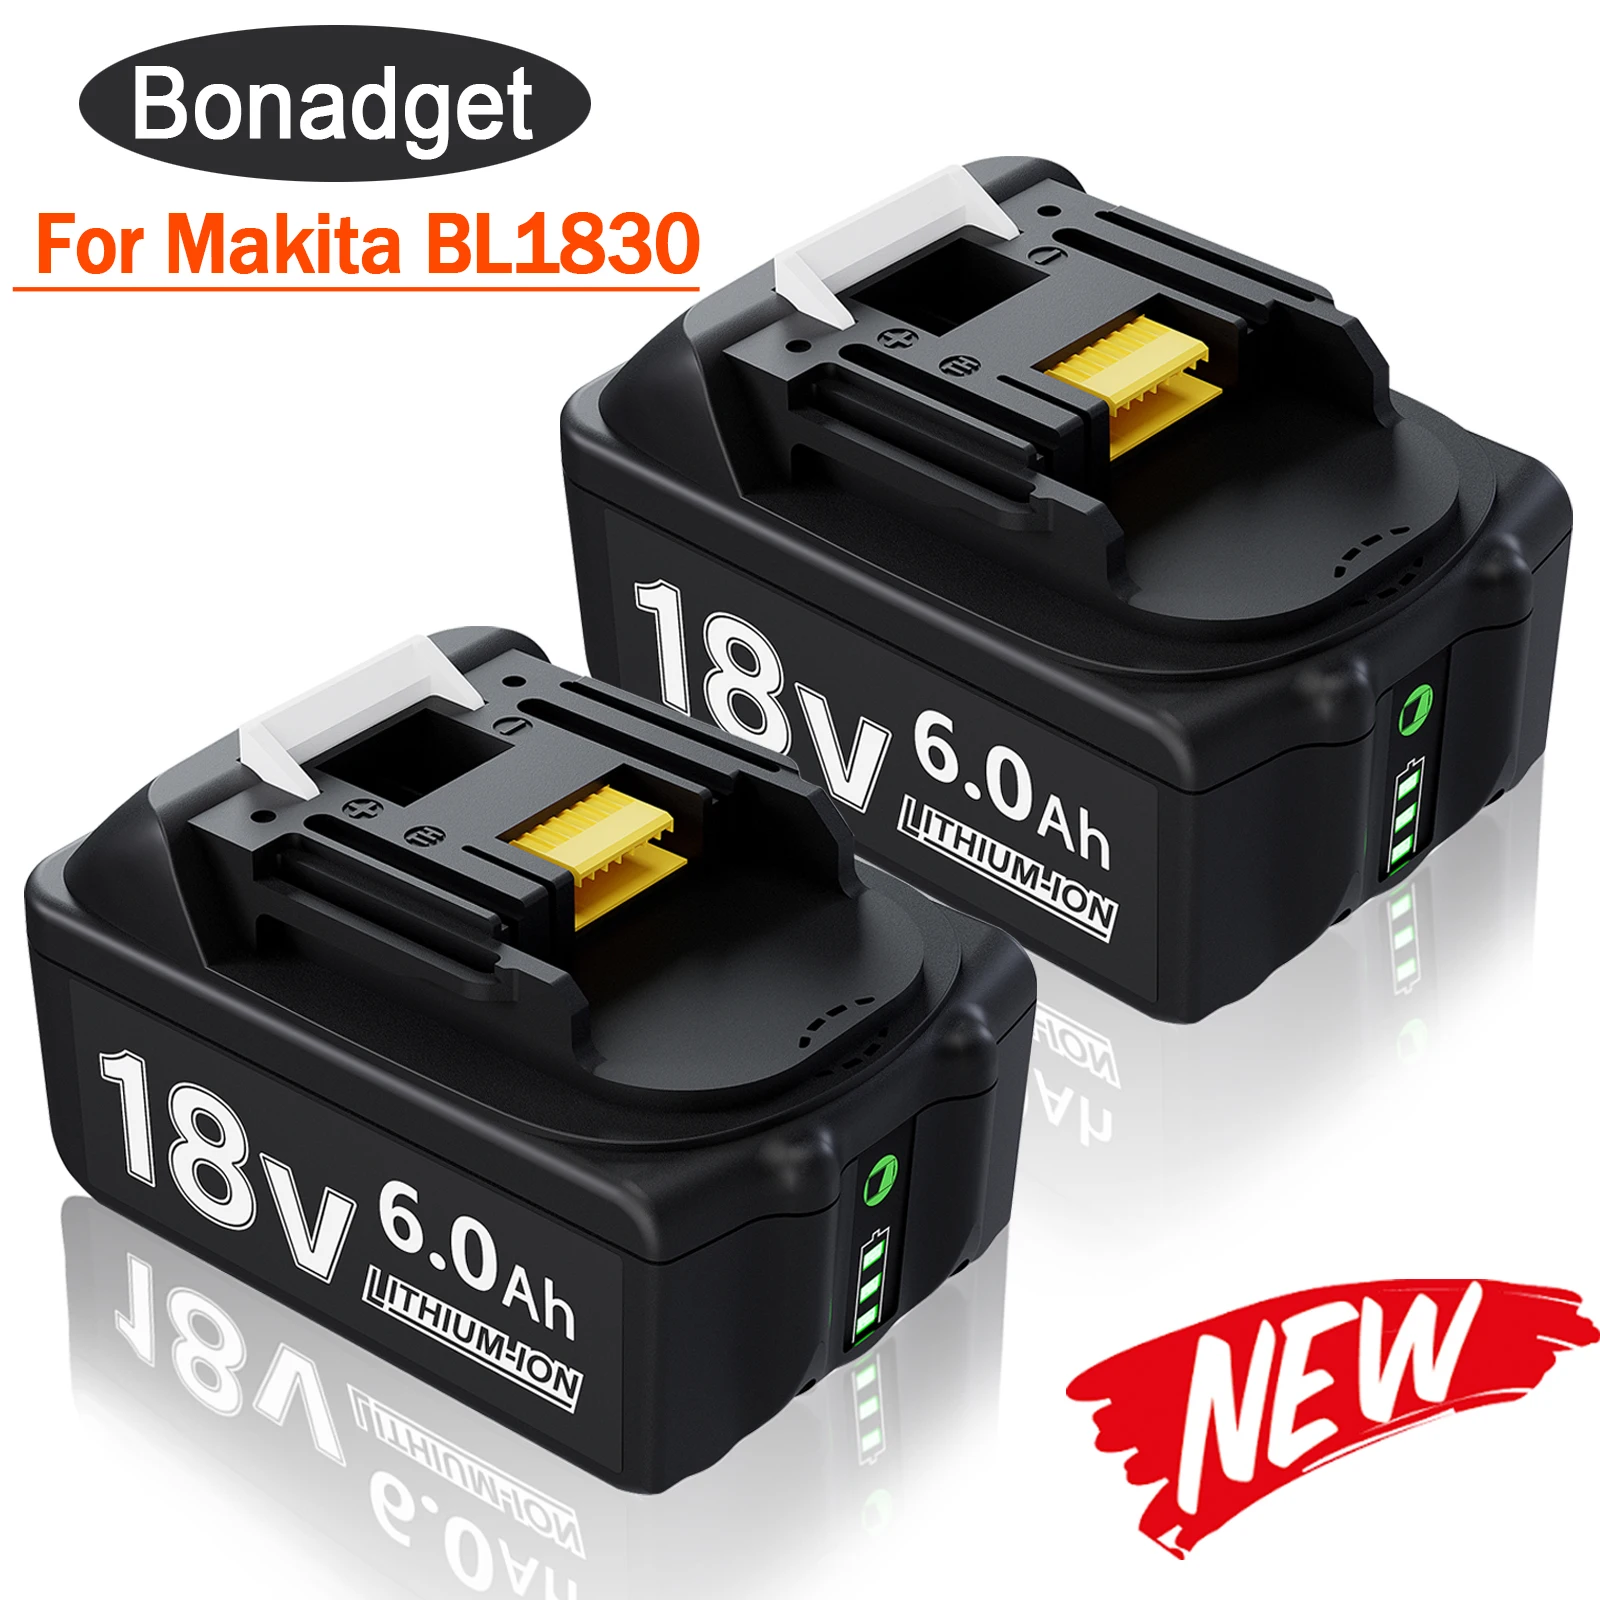 

Bonadget Rechargeable 18V 6000mAh Li-Ion Battery For Makita BL1830 BL1815 BL1860 BL1840 194205-3 Replacement Power Tools Battery